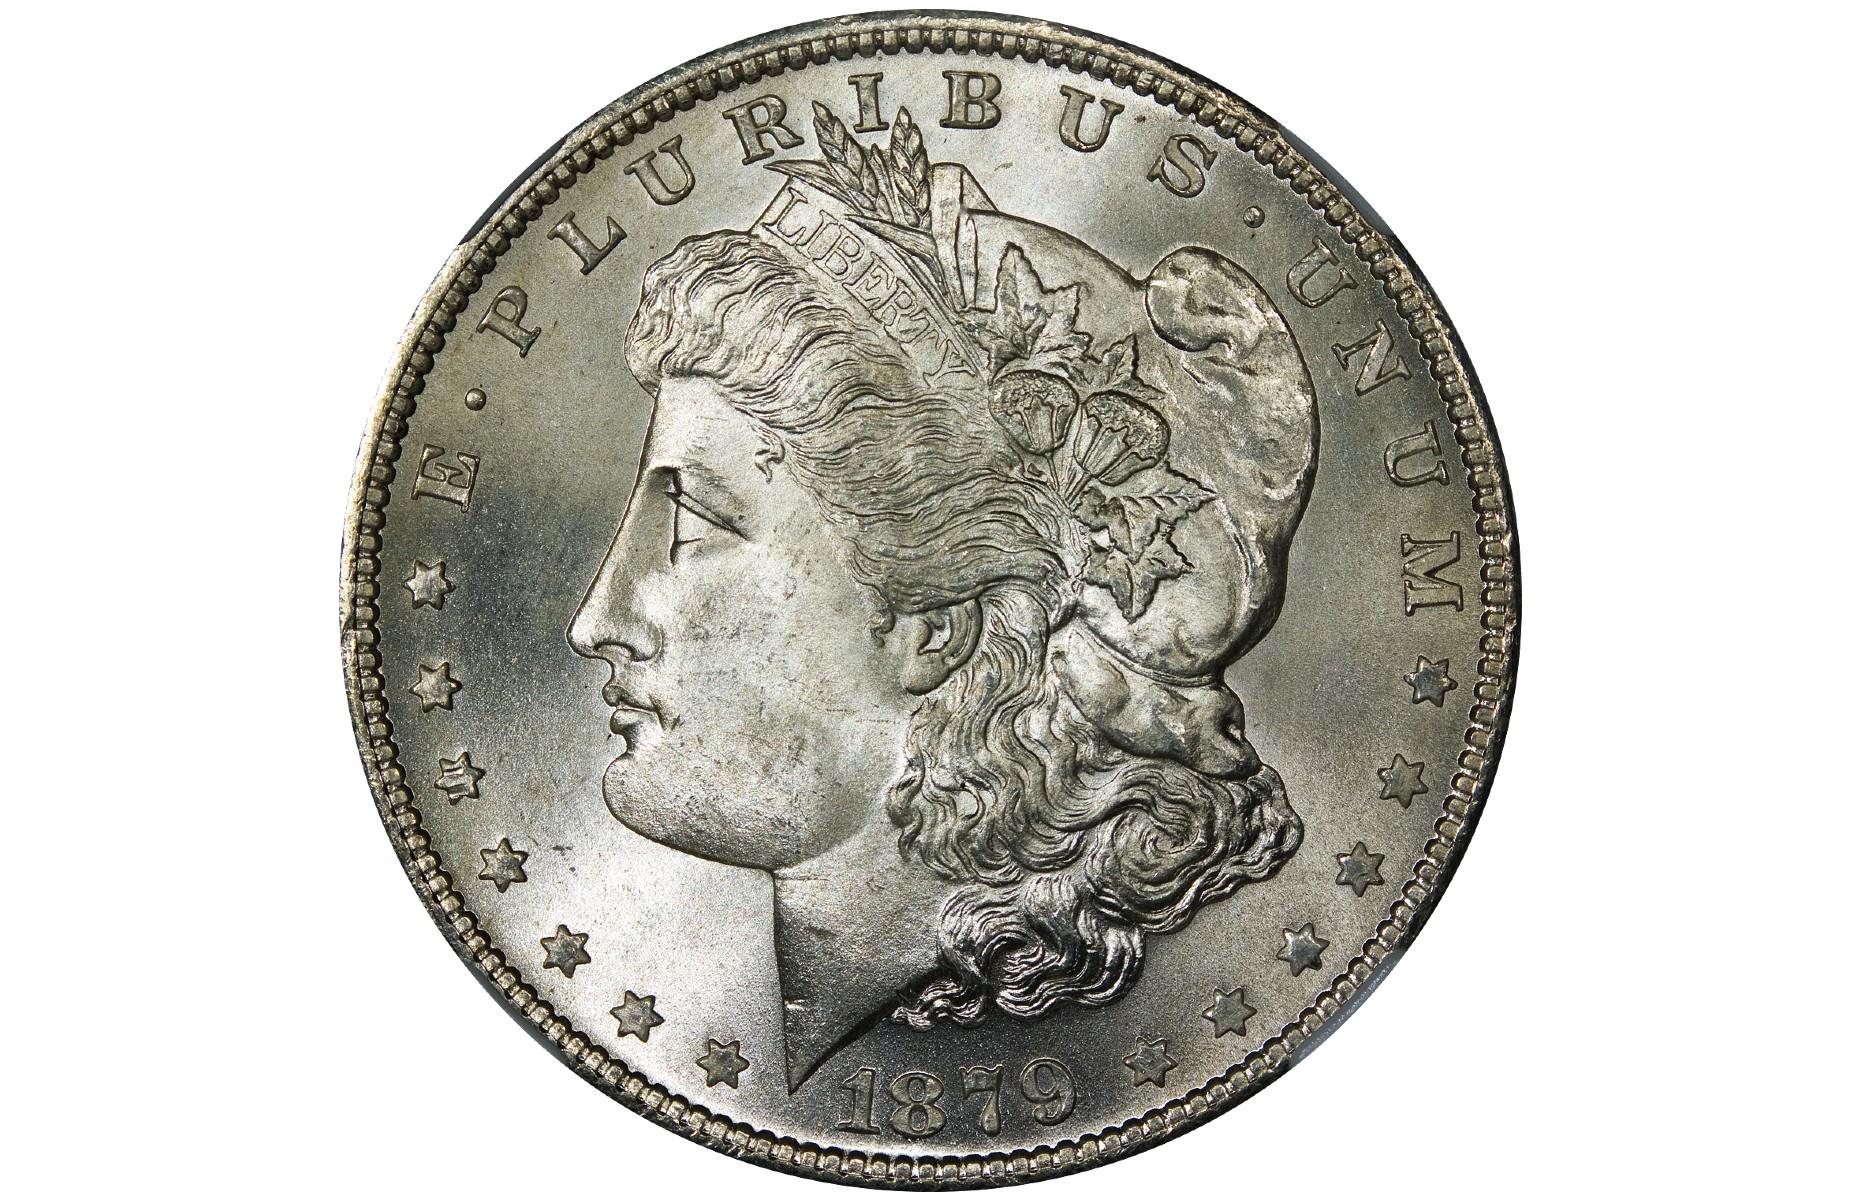 Coins in a closet drawer: $25,000 (£18.9k)